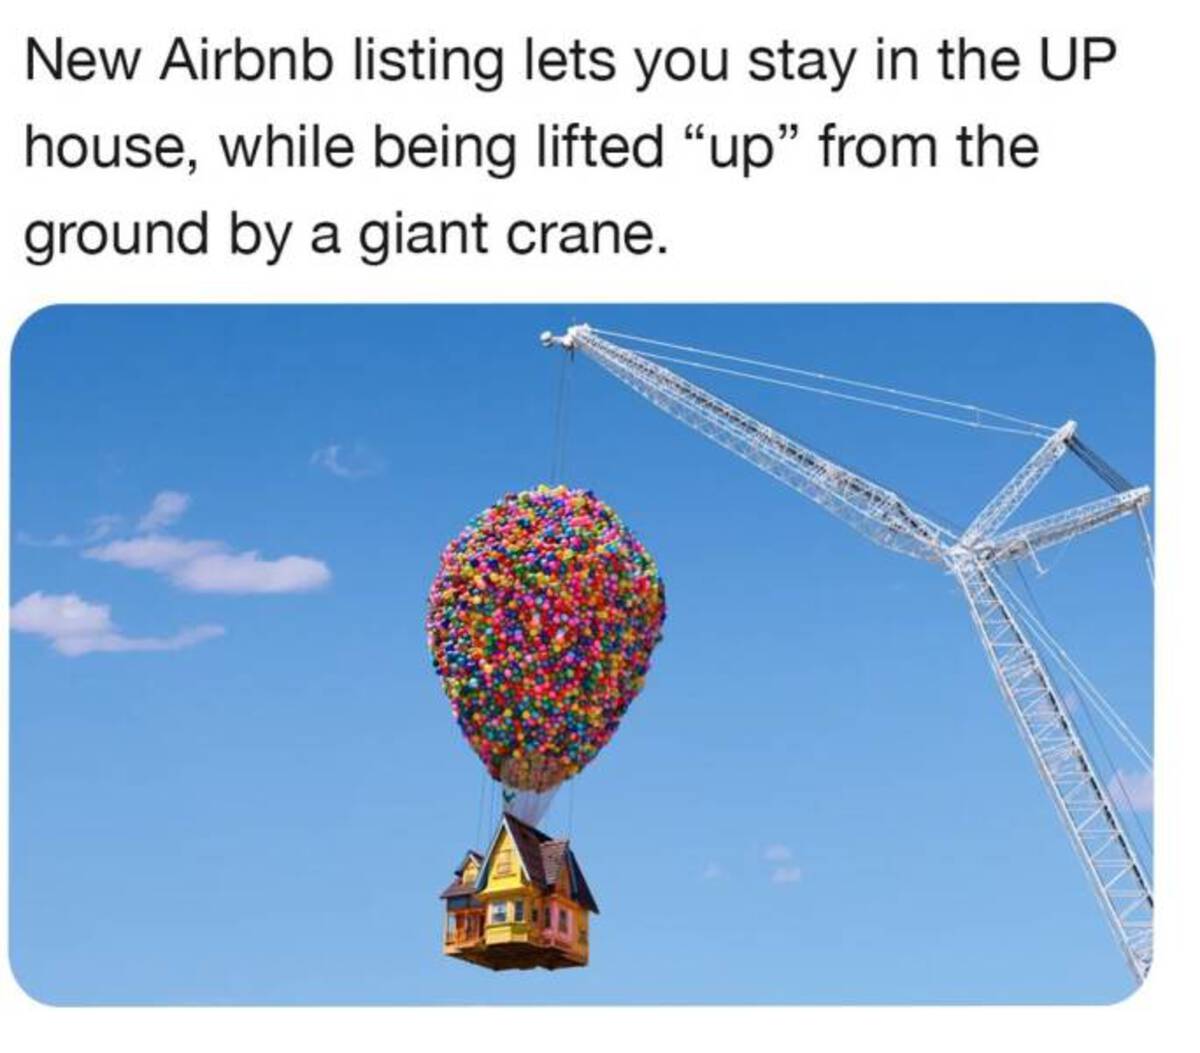 Airbnb - New Airbnb listing lets you stay in the Up house, while being lifted "up" from the ground by a giant crane.